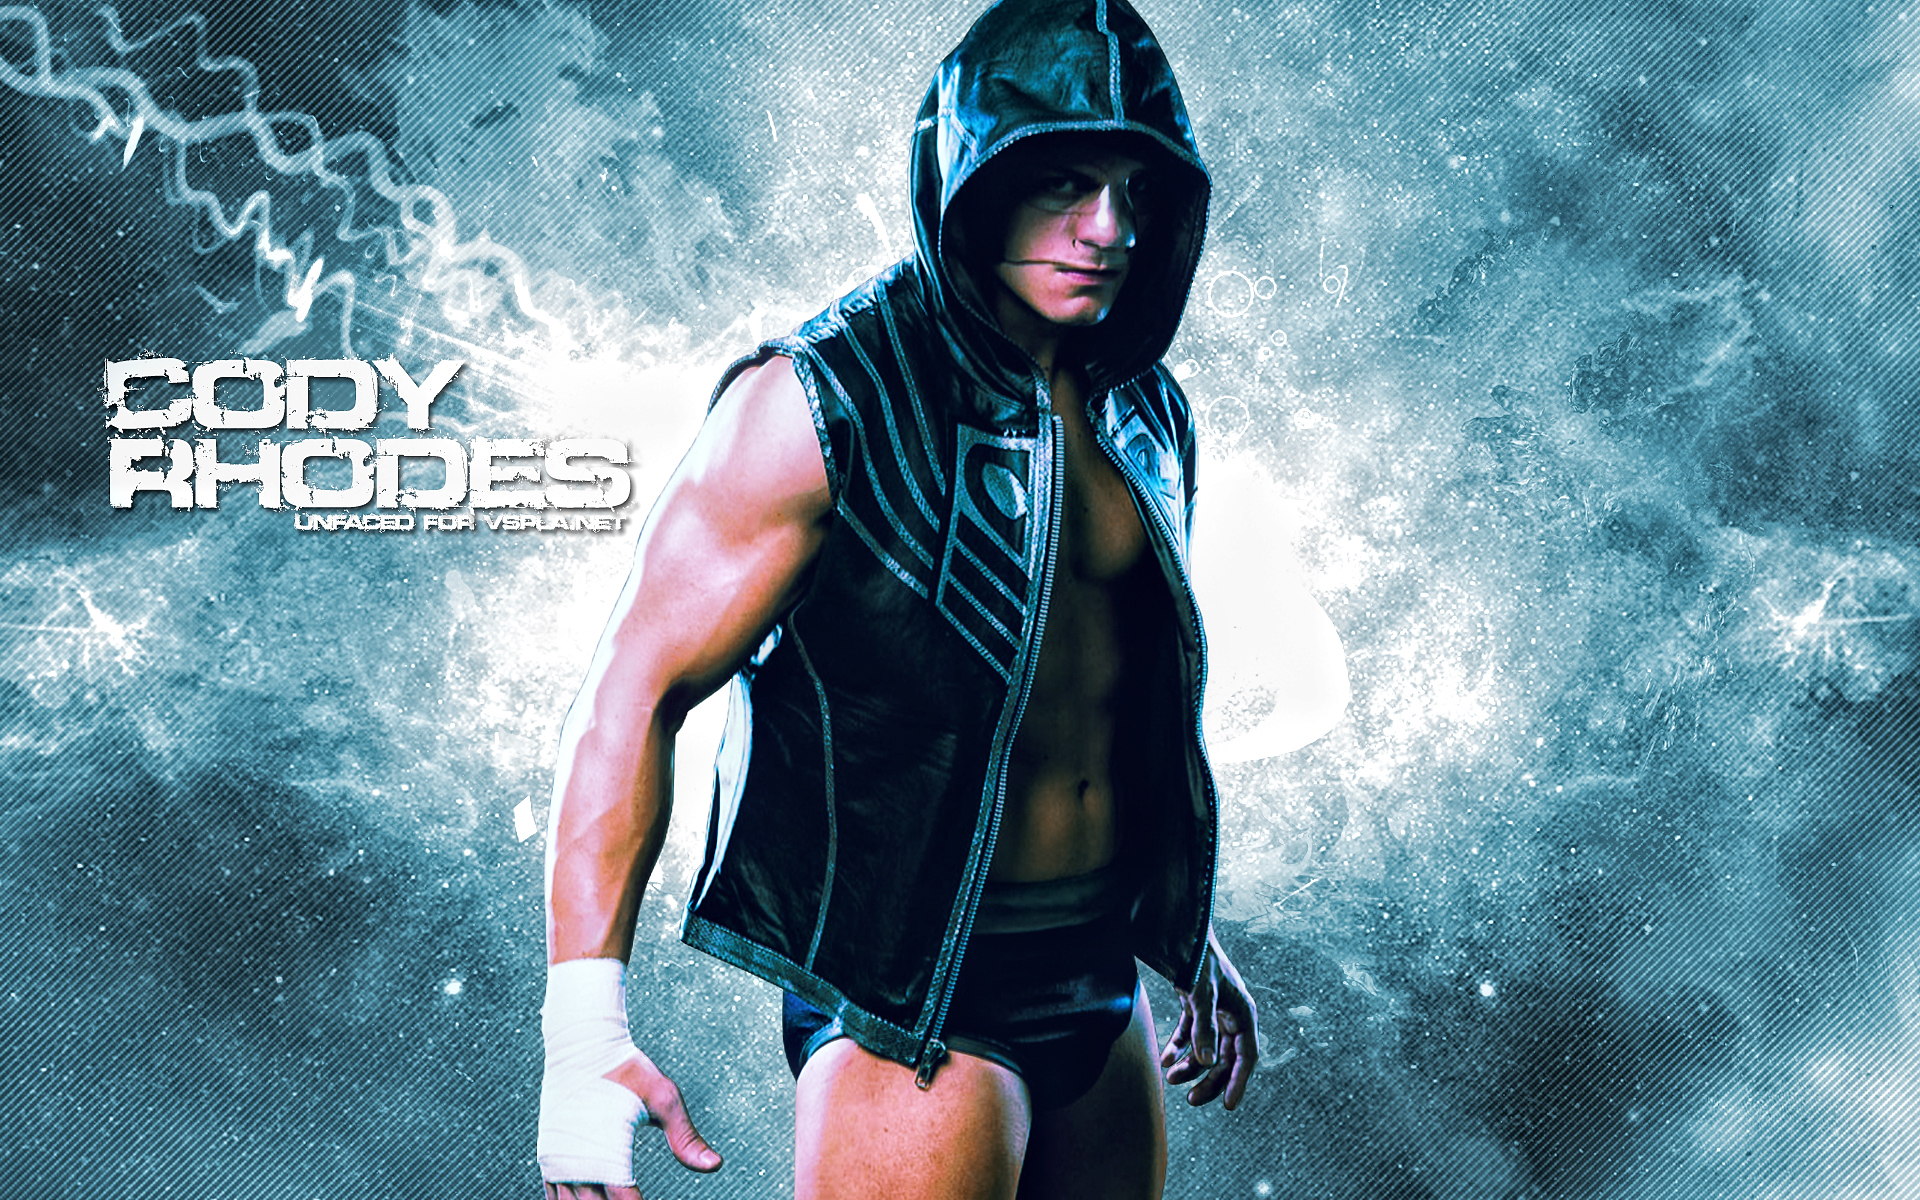 Cody Rhodes Wallpapers. 